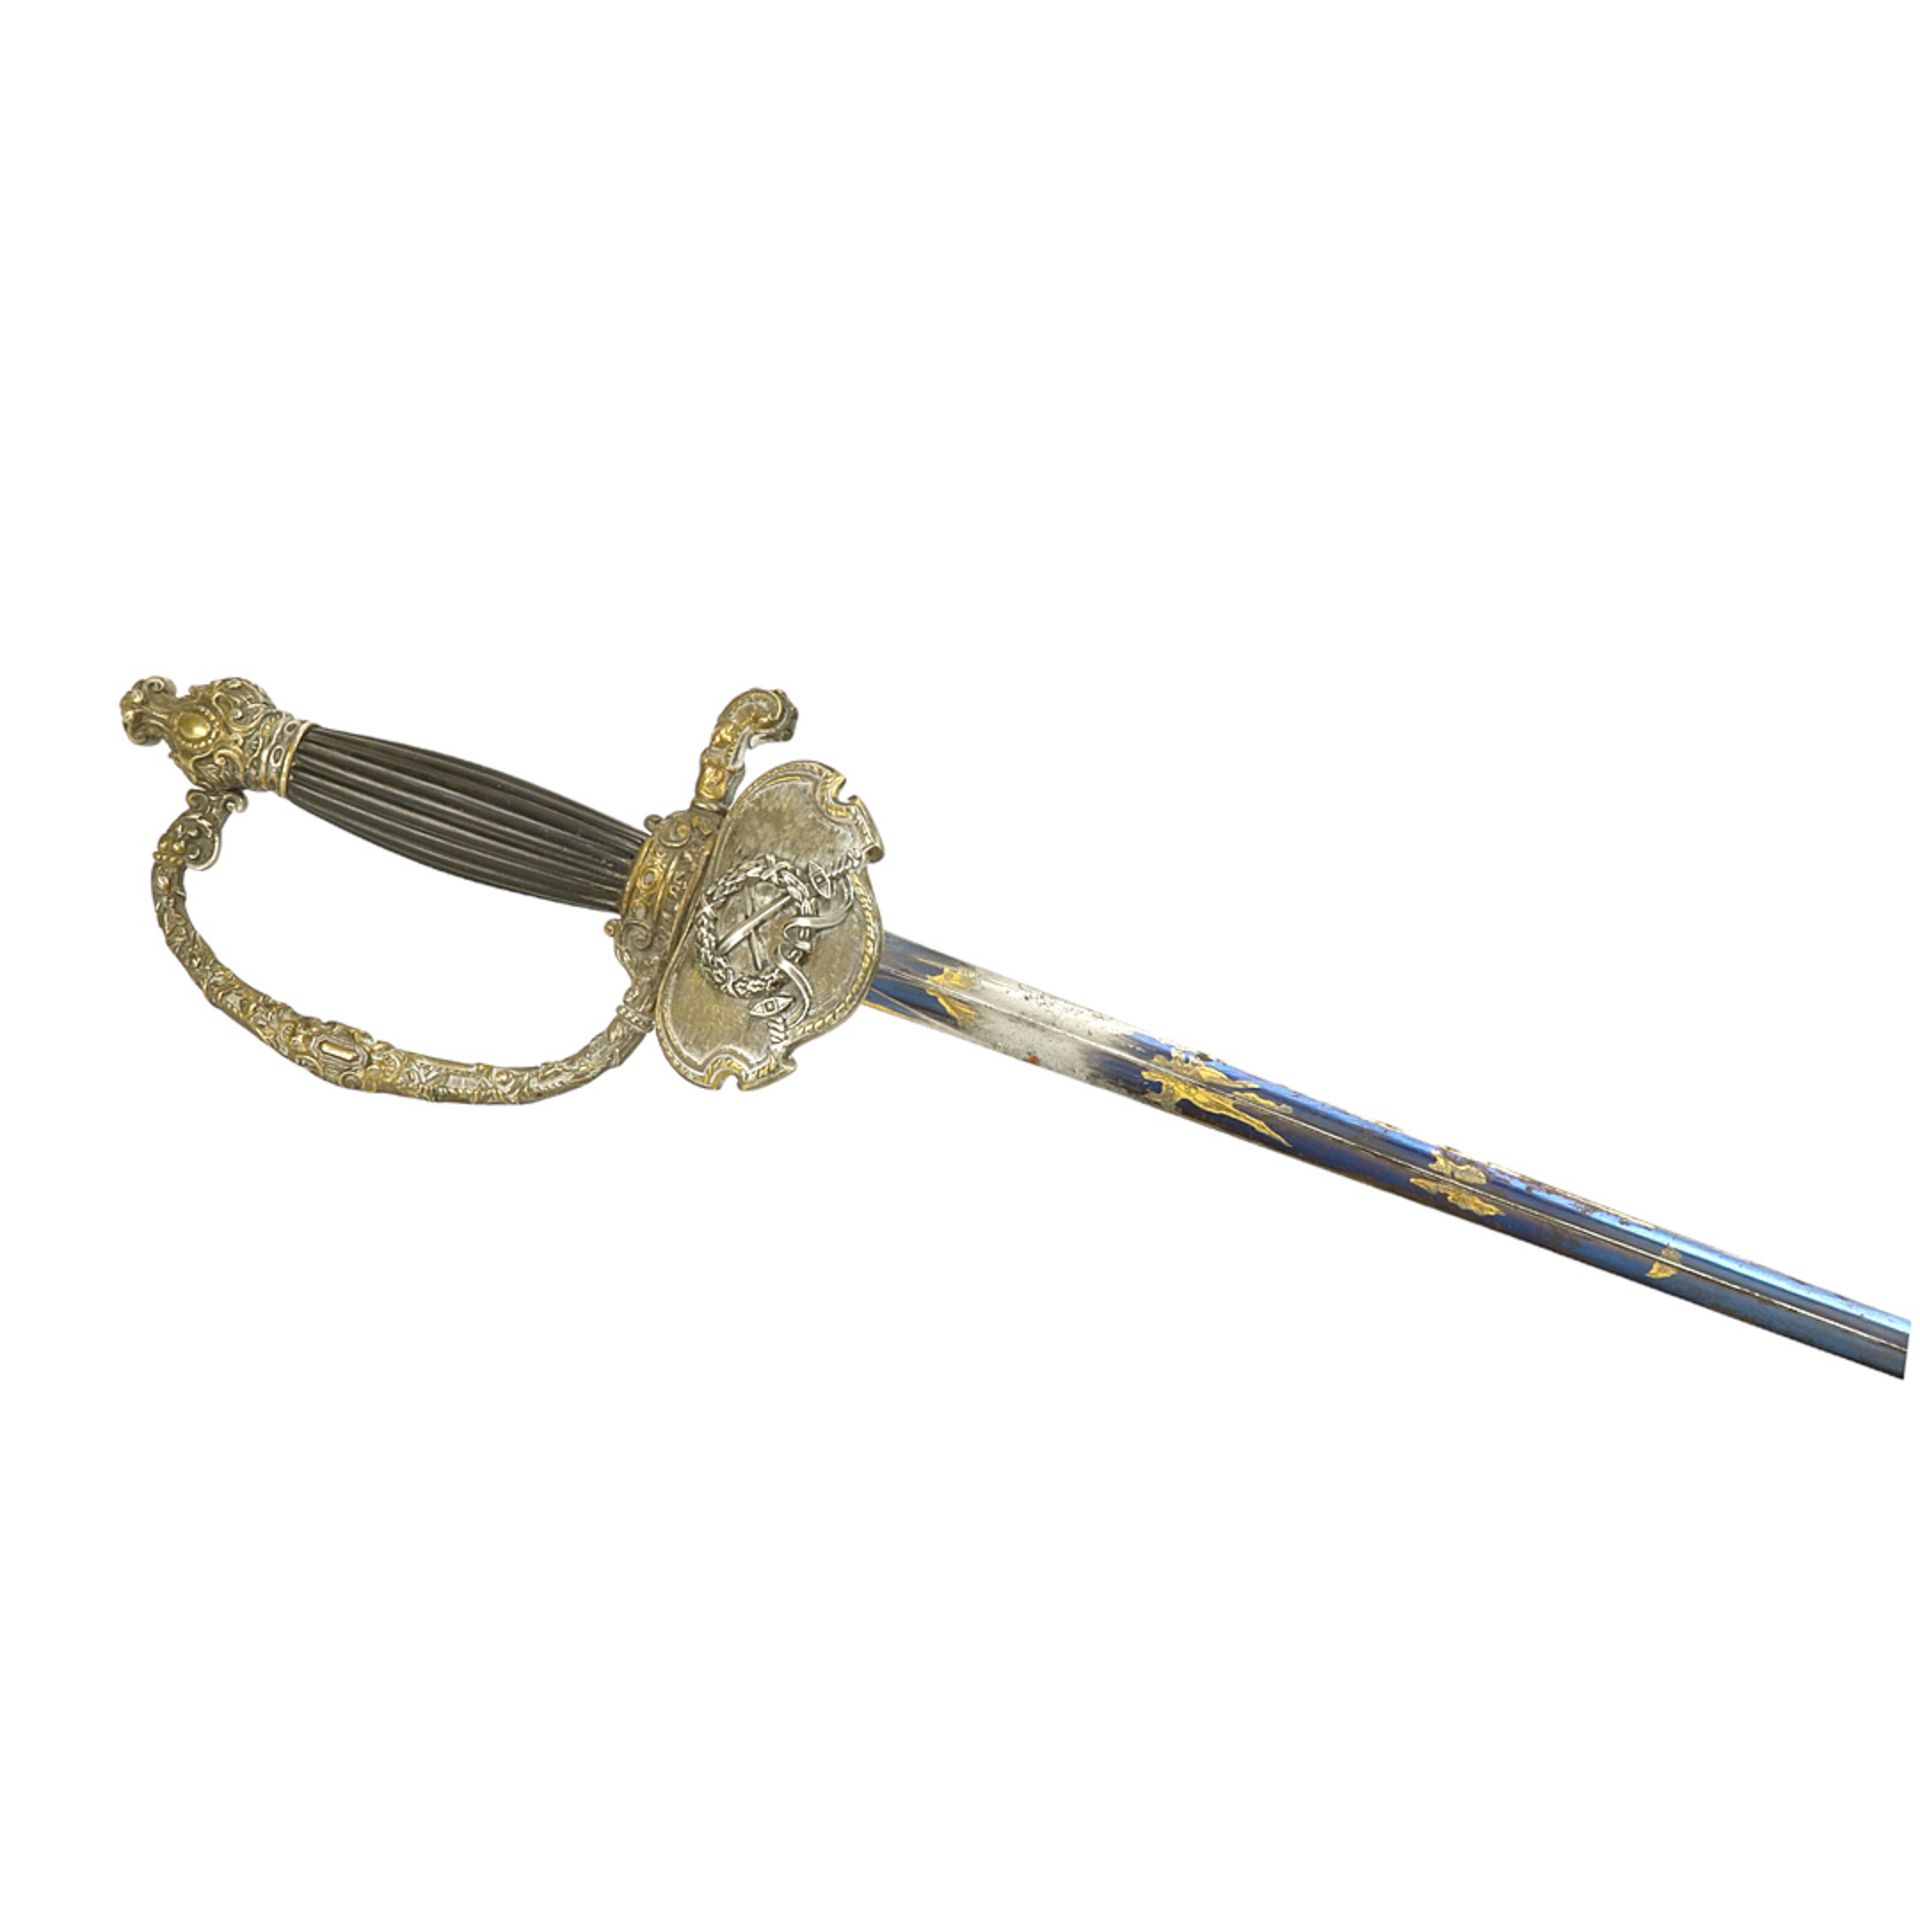 French officer's sword, around 1830